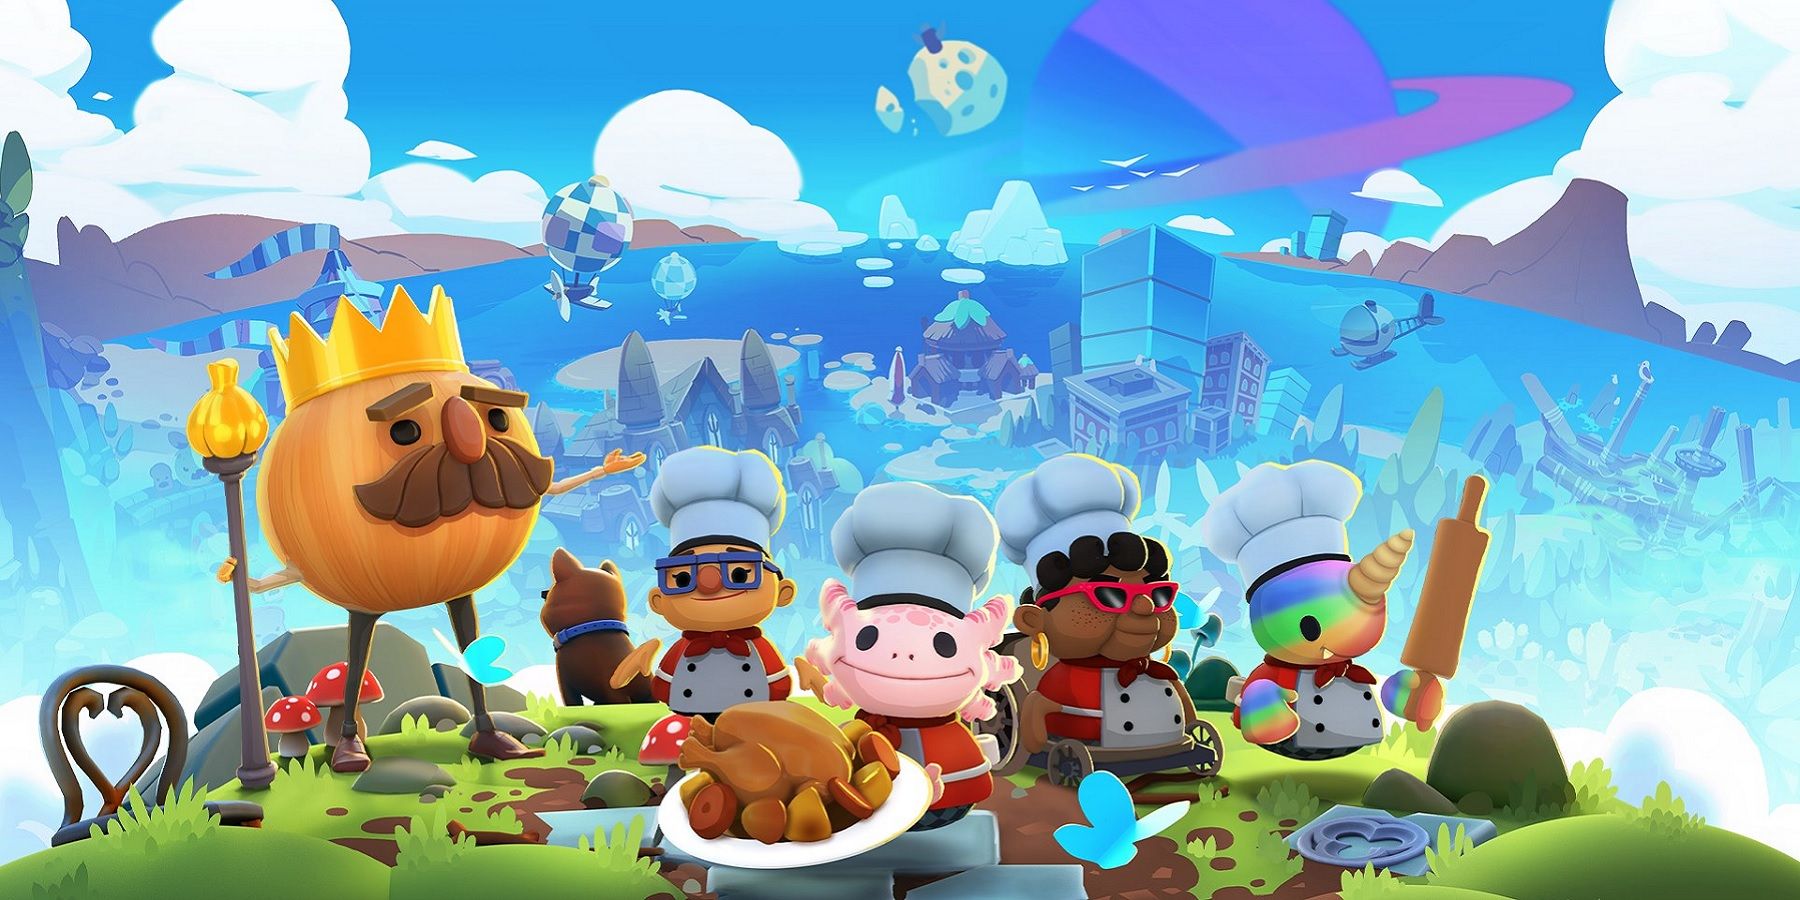 World Food Festival is a FREE update that adds new levels, chefs